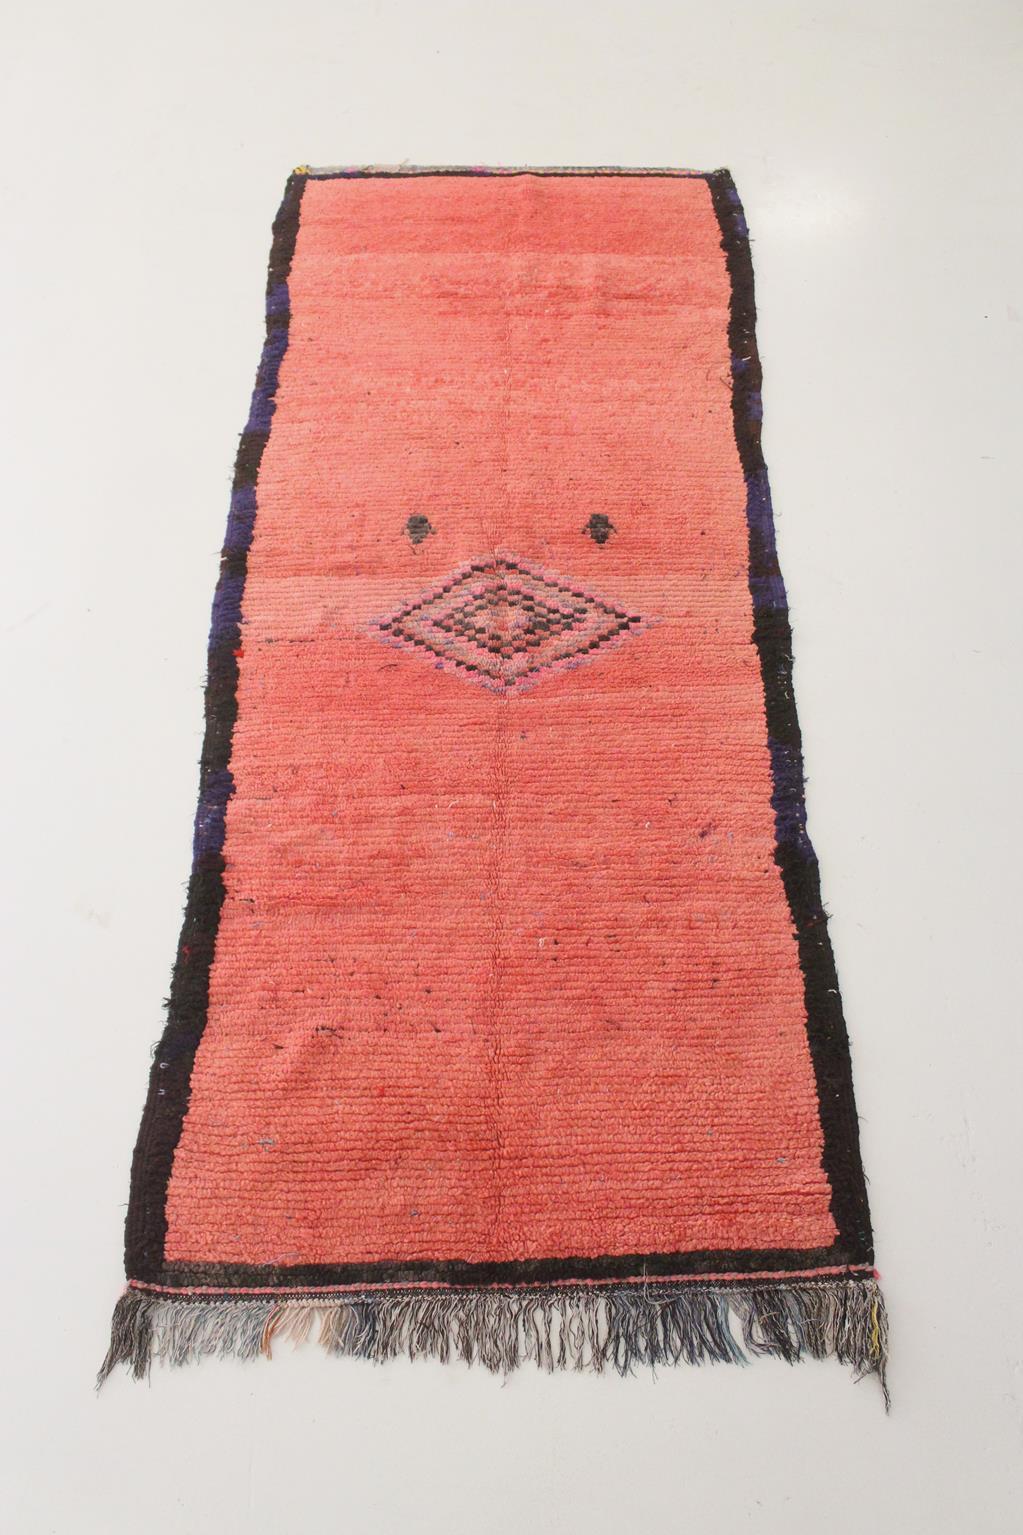 Vintage Moroccan Boujad runner rug - Rich pink - 3.4x8.4feet / 105x257cm In Good Condition For Sale In Marrakech, MA